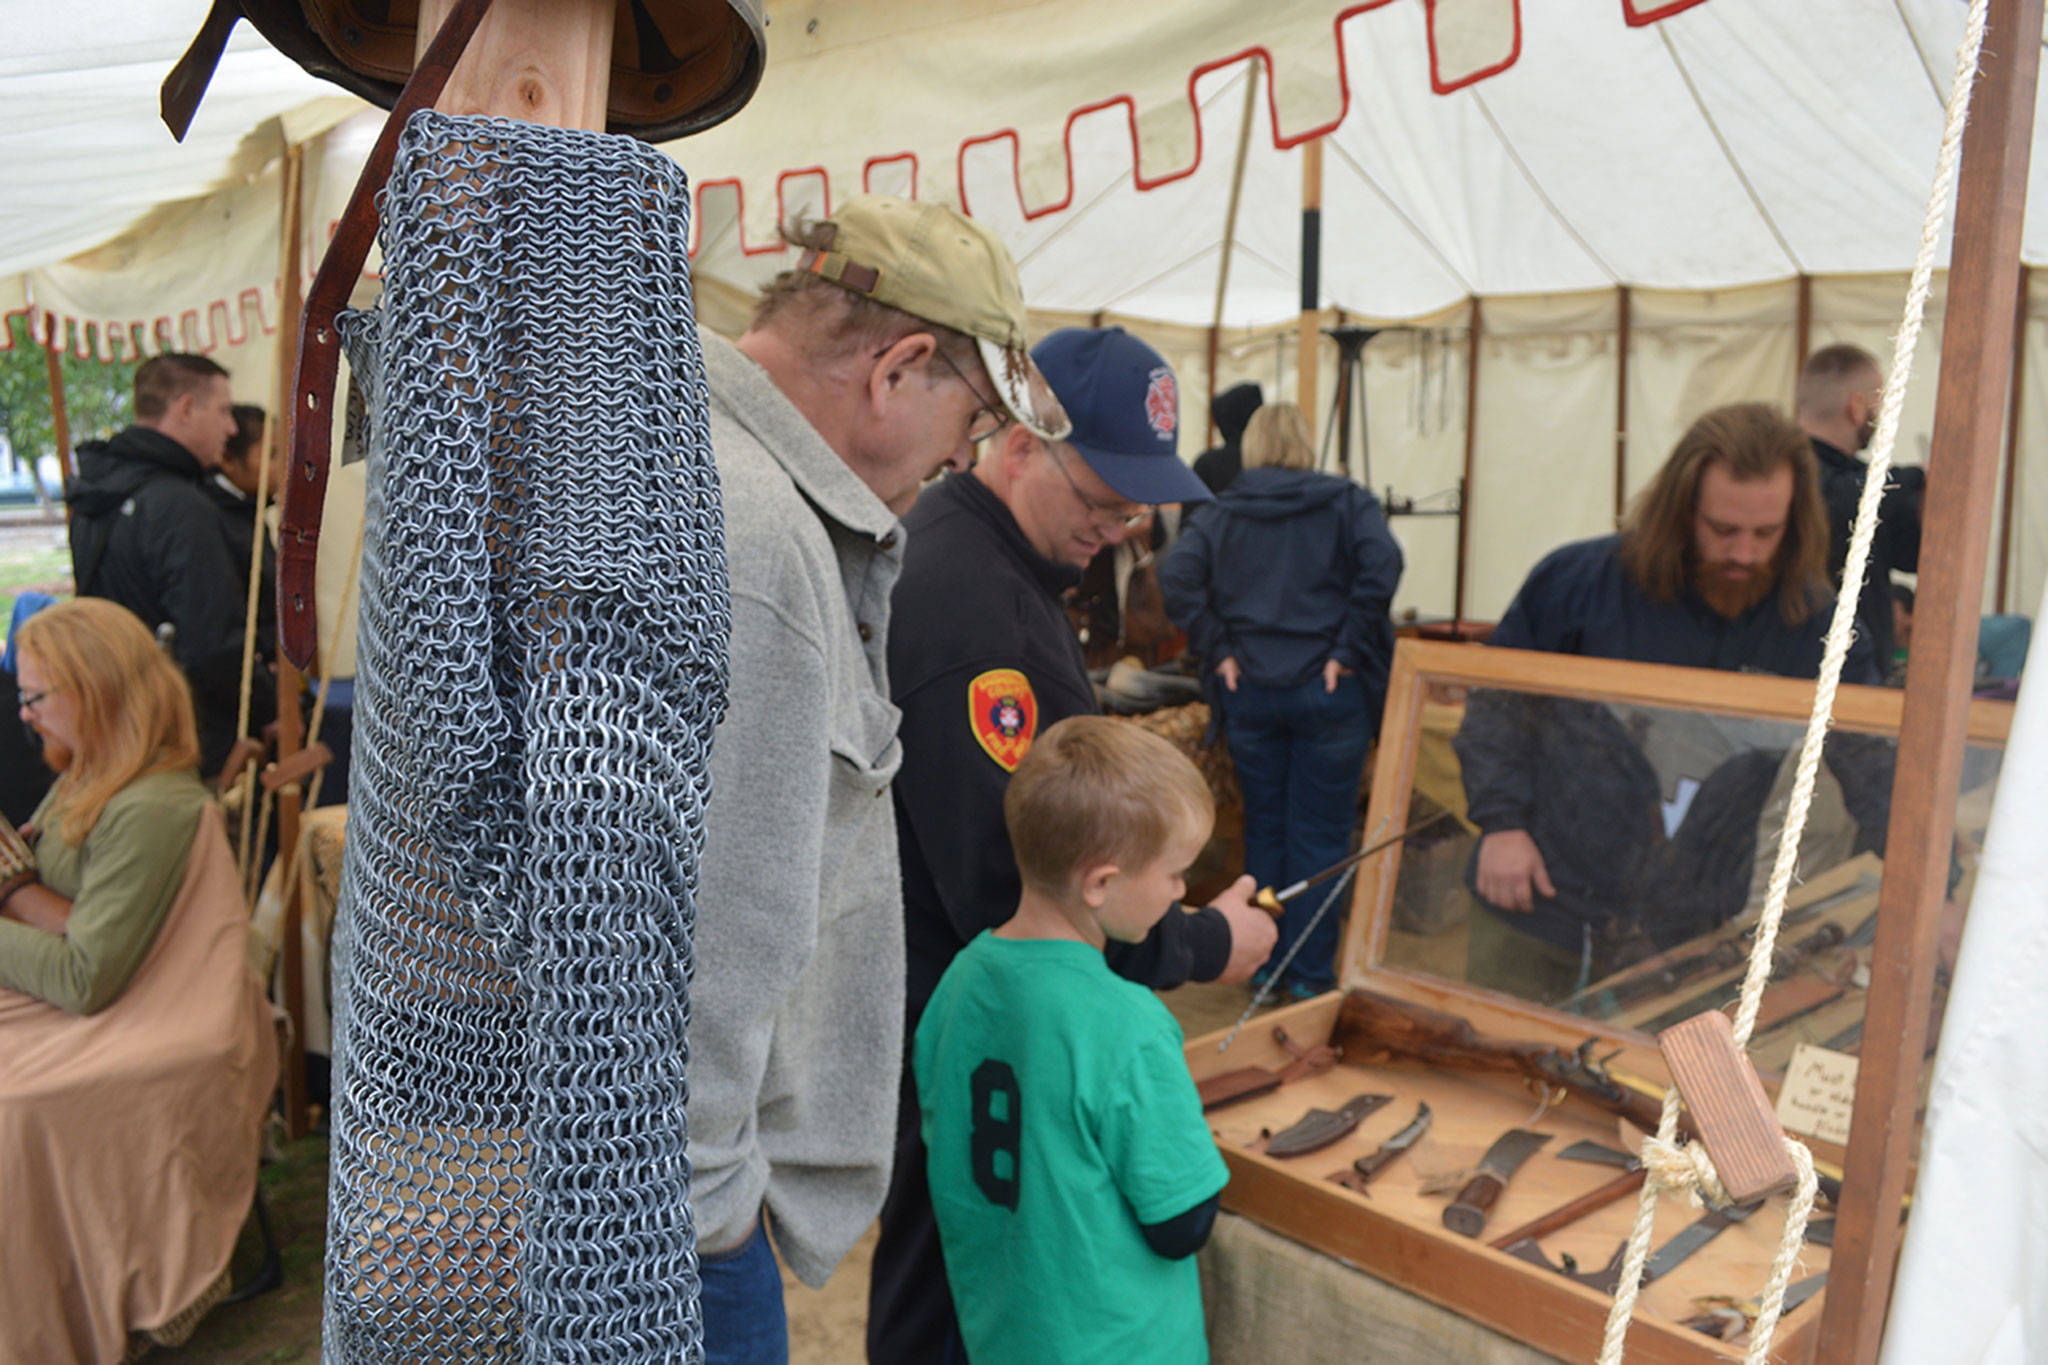 All aim to have a good time at 3rd Arlington Viking Fest